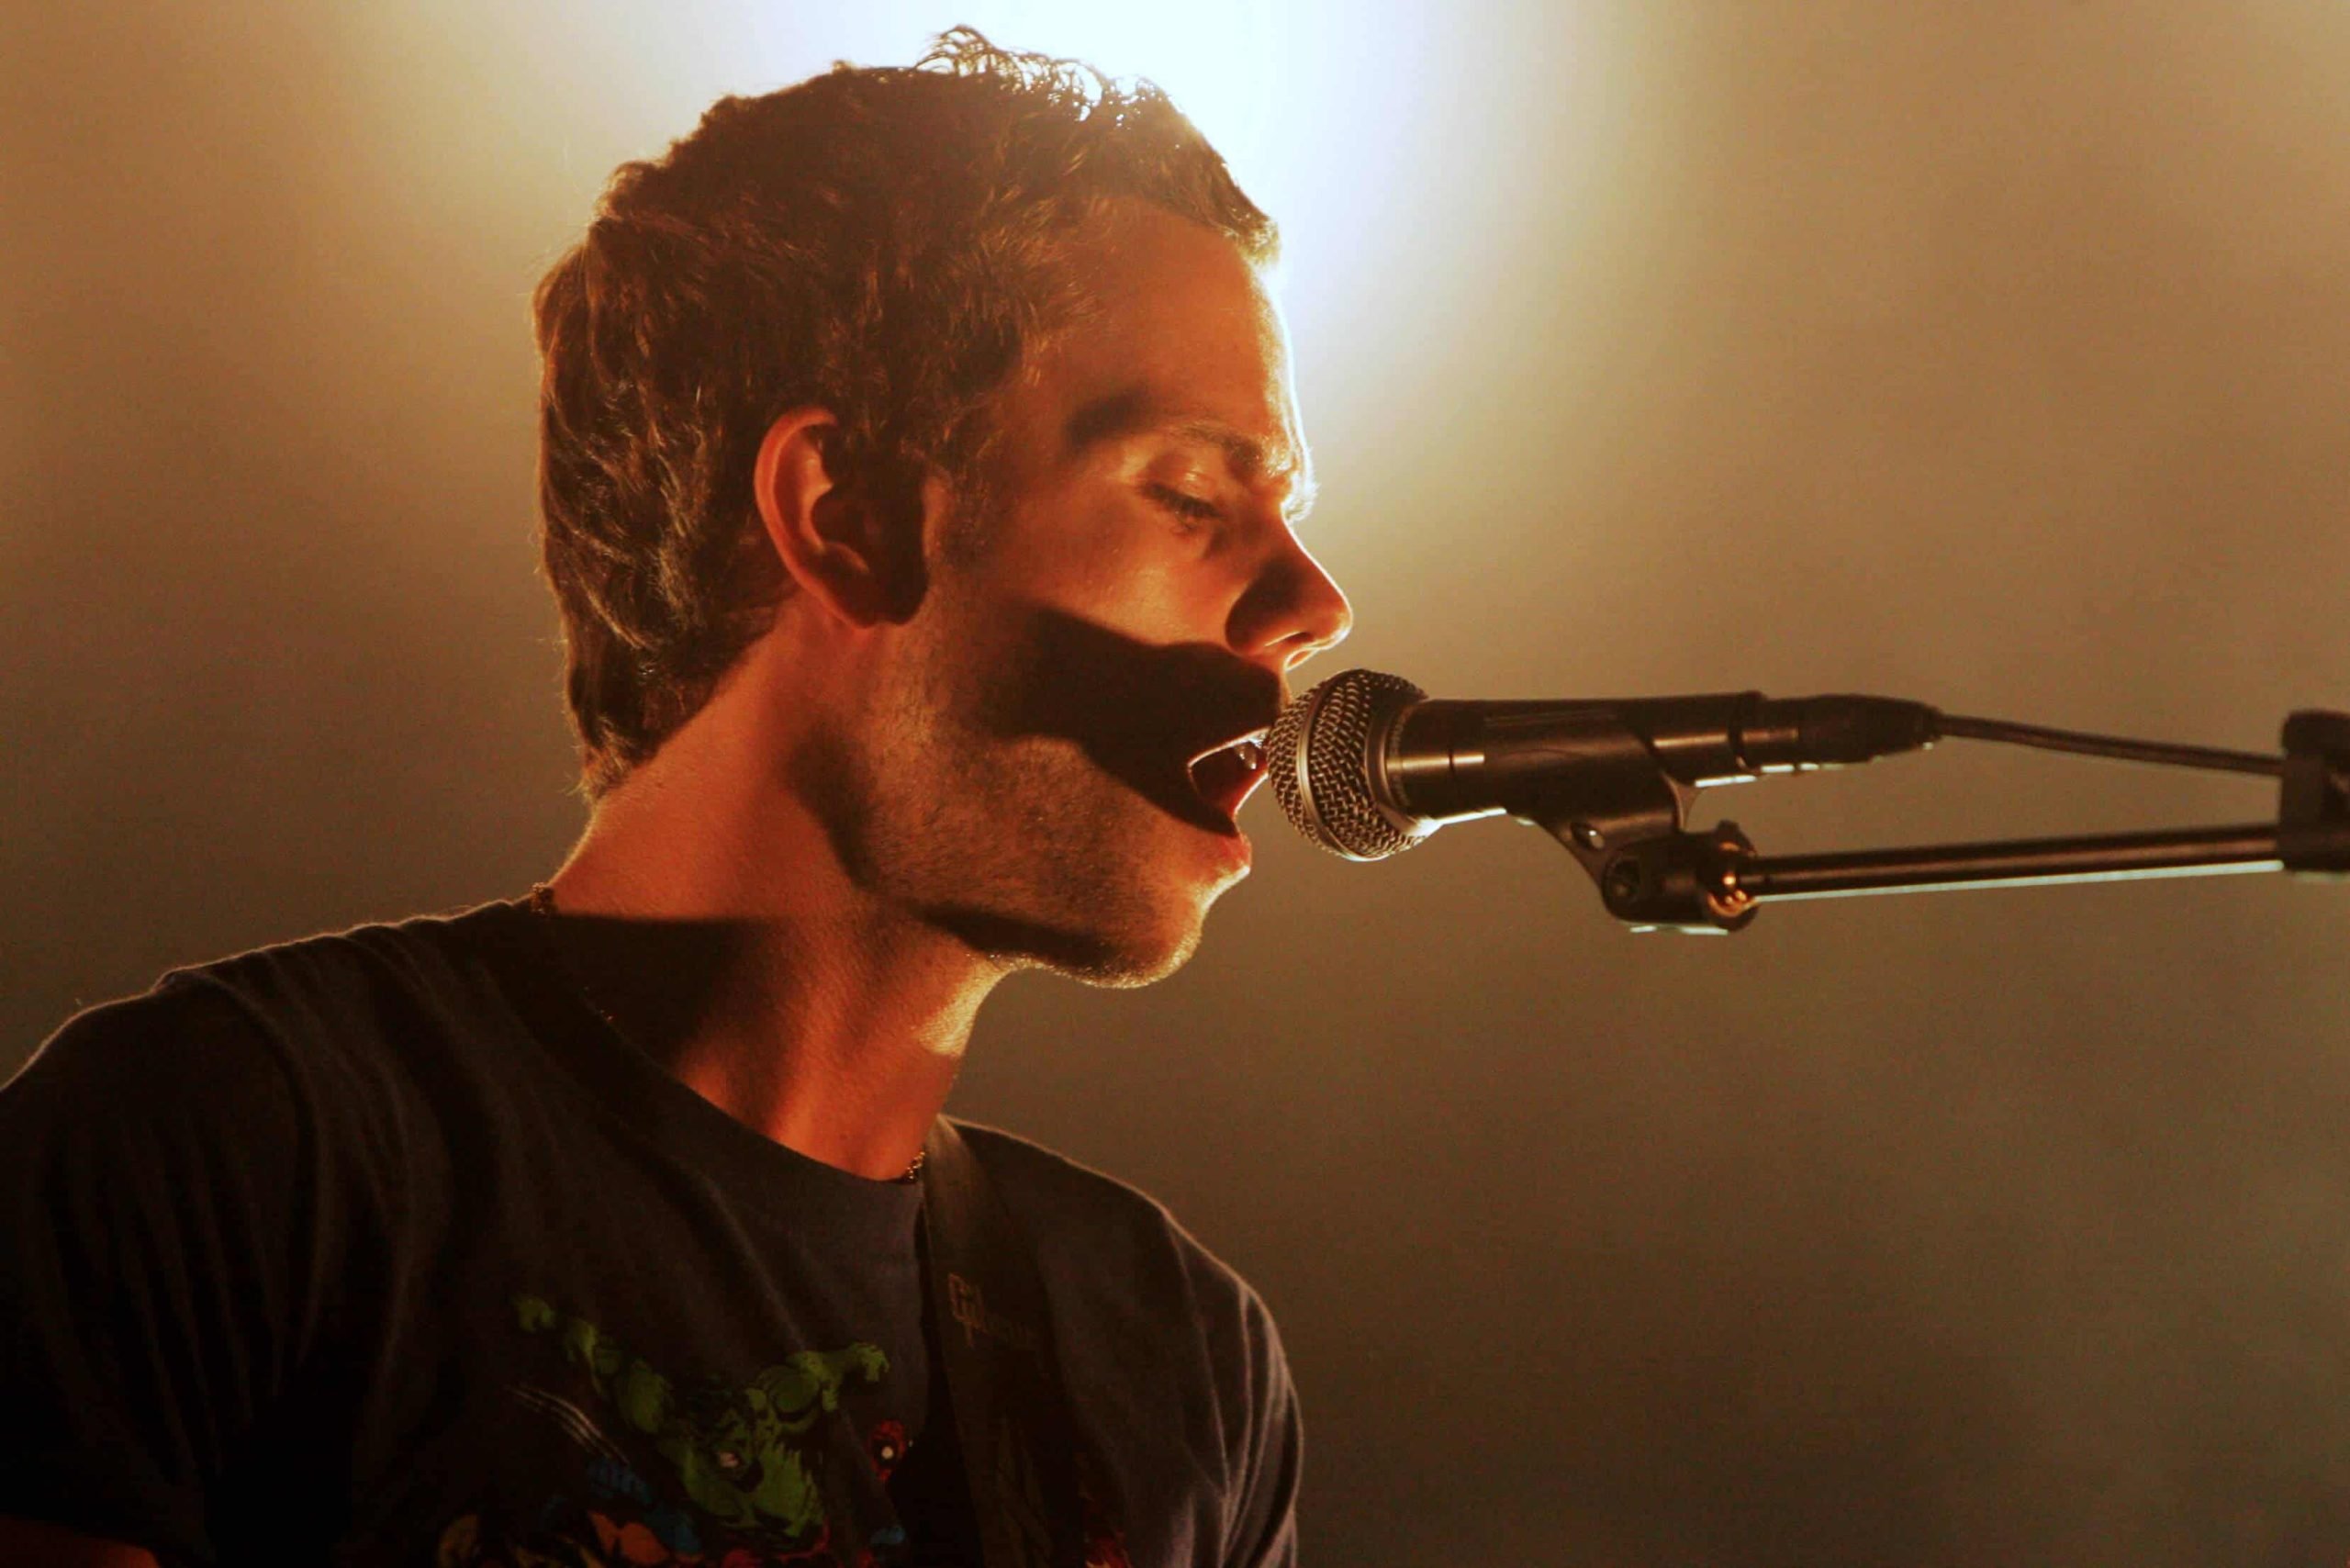 M83 expressed that EDM is one of the music genres he dislikes the most